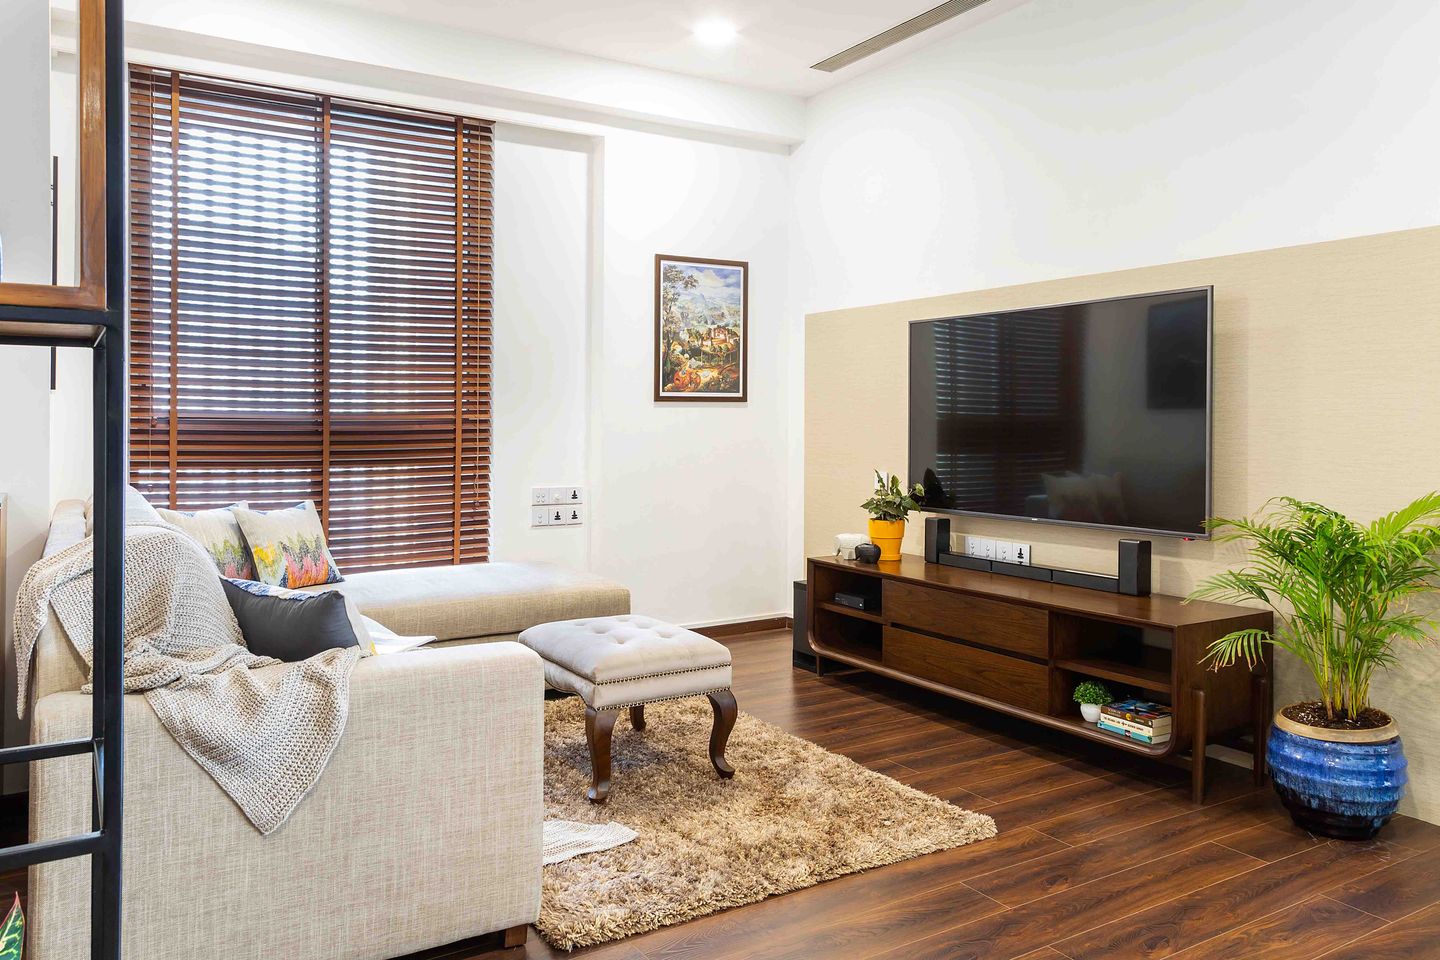 2-BHK Flat In Mumbai With Wooden TV Console - Livspace